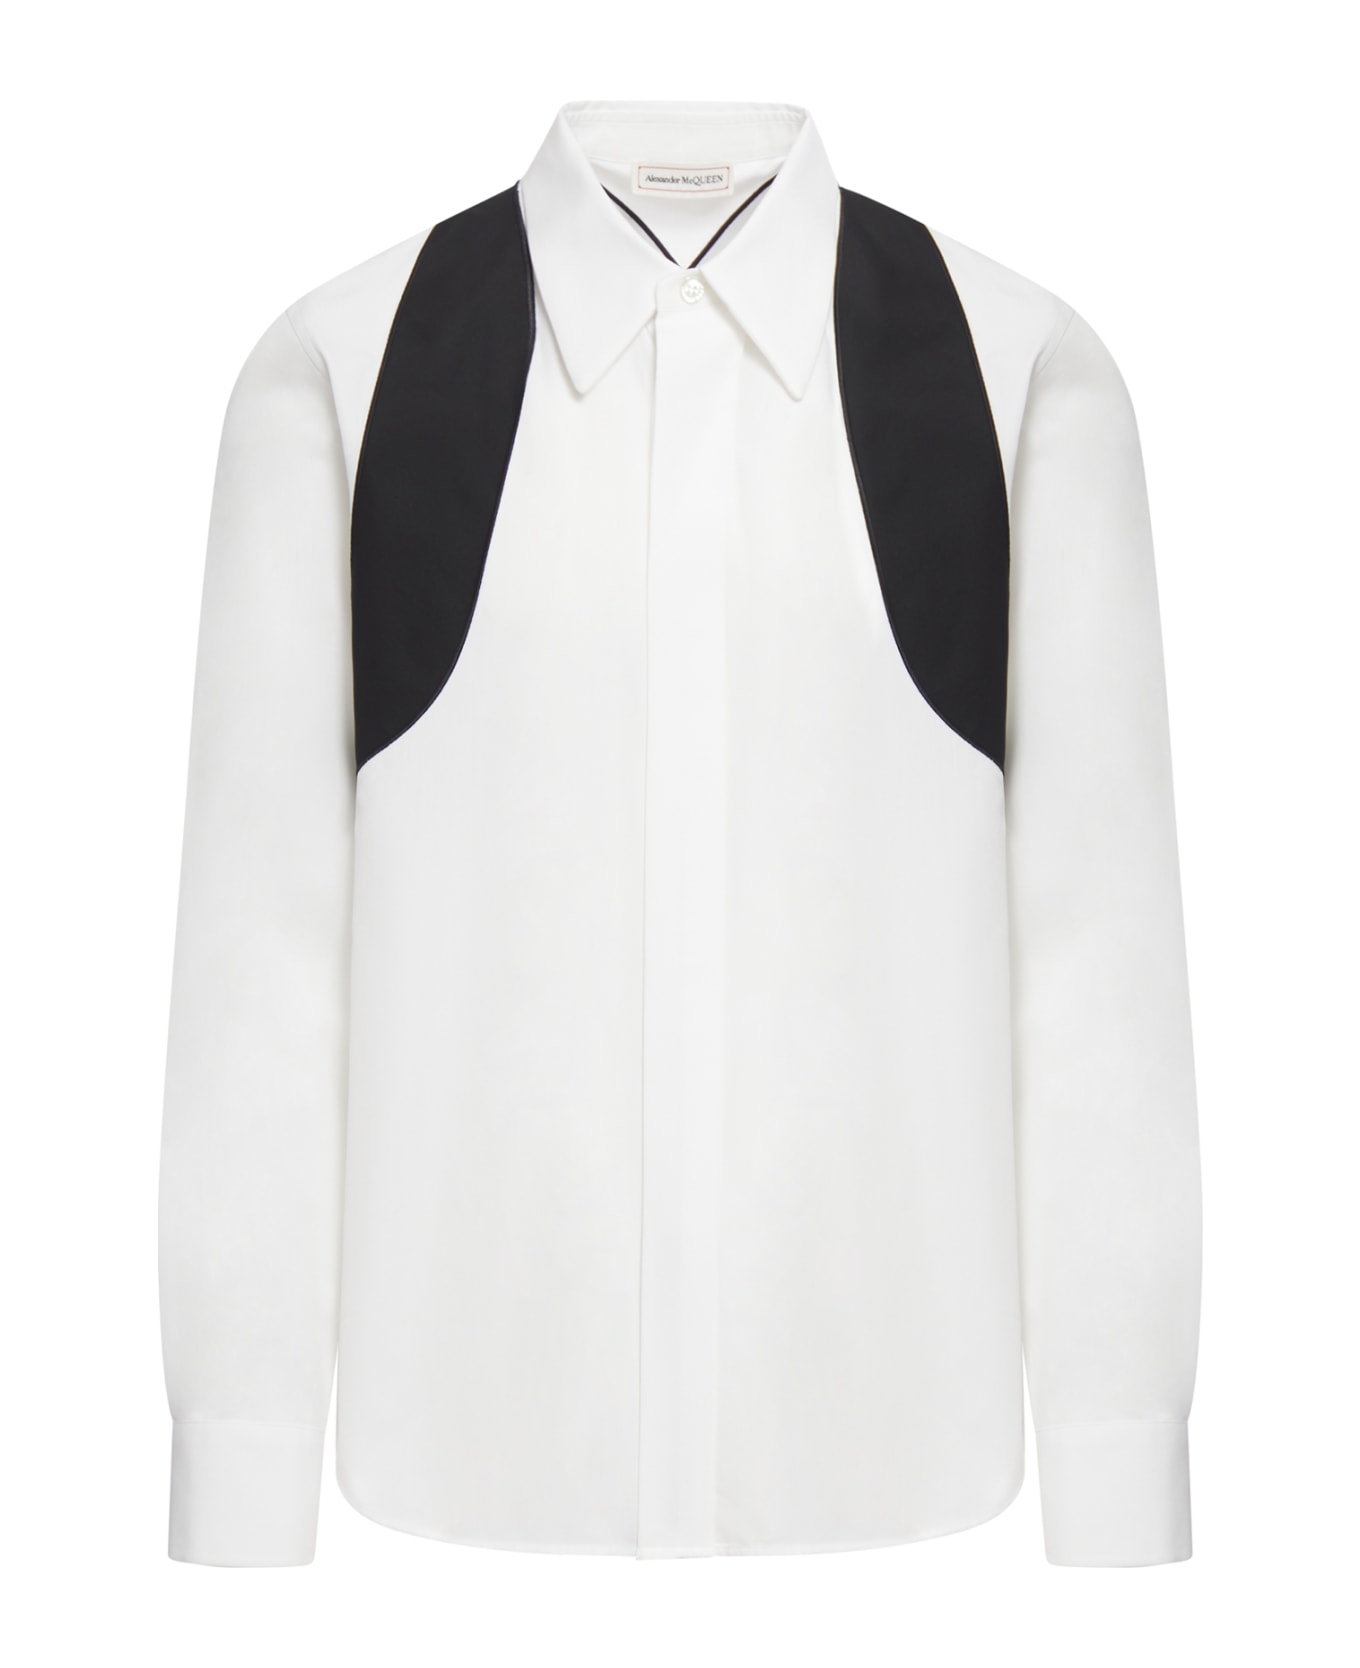 Alexander McQueen Graphic Printed Long Sleeved Shirt - Optical White シャツ